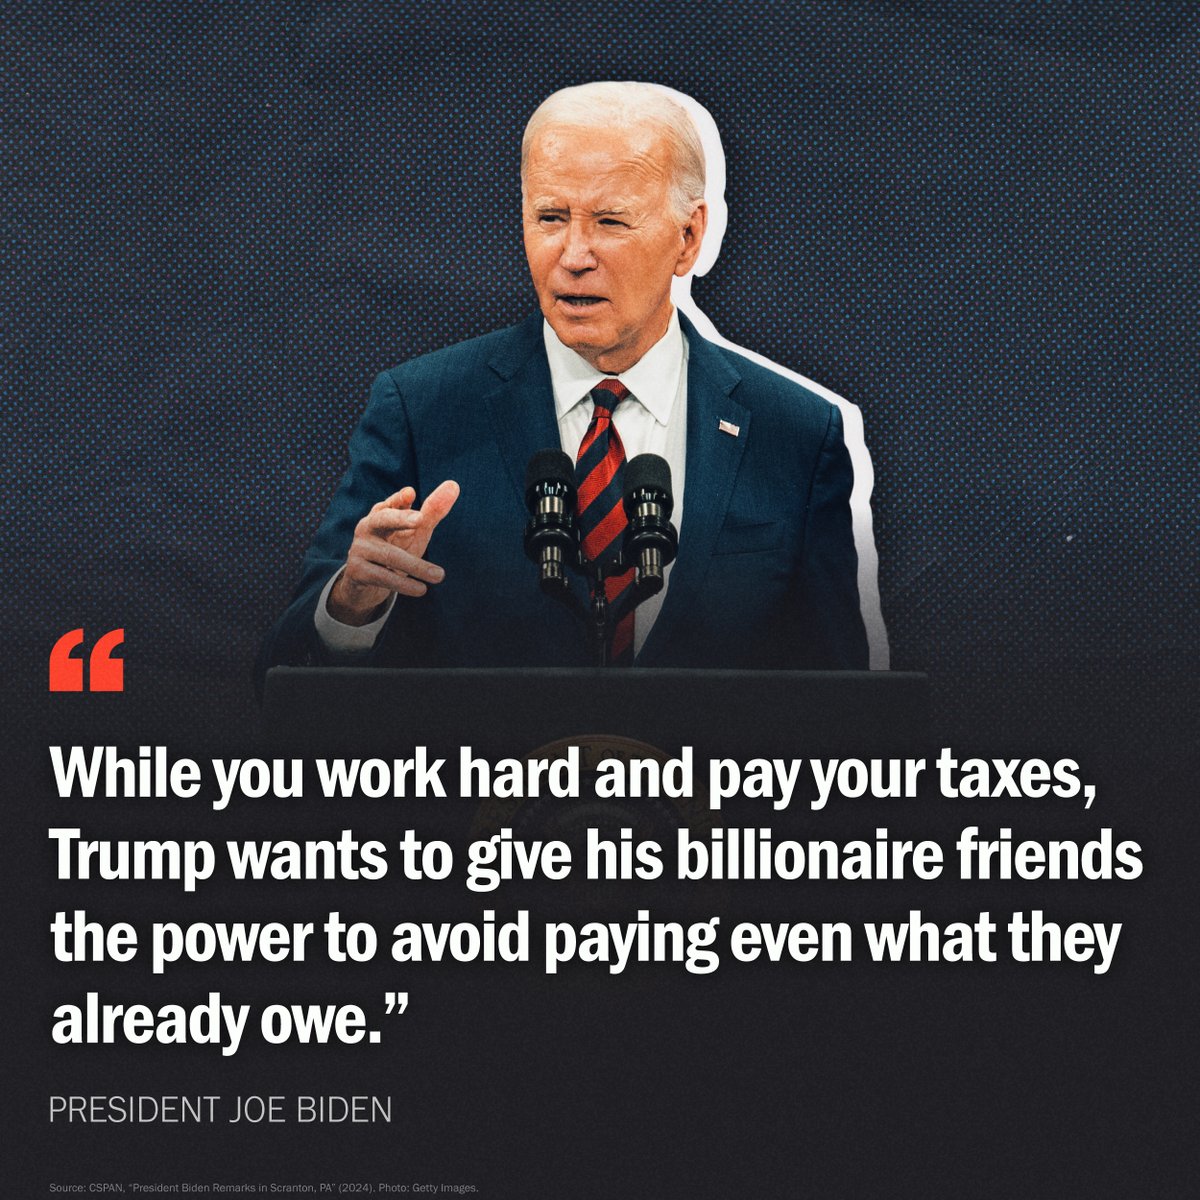 Biden is focused on cracking down on ultrarich tax cheats—Trump wants to give them a free pass.